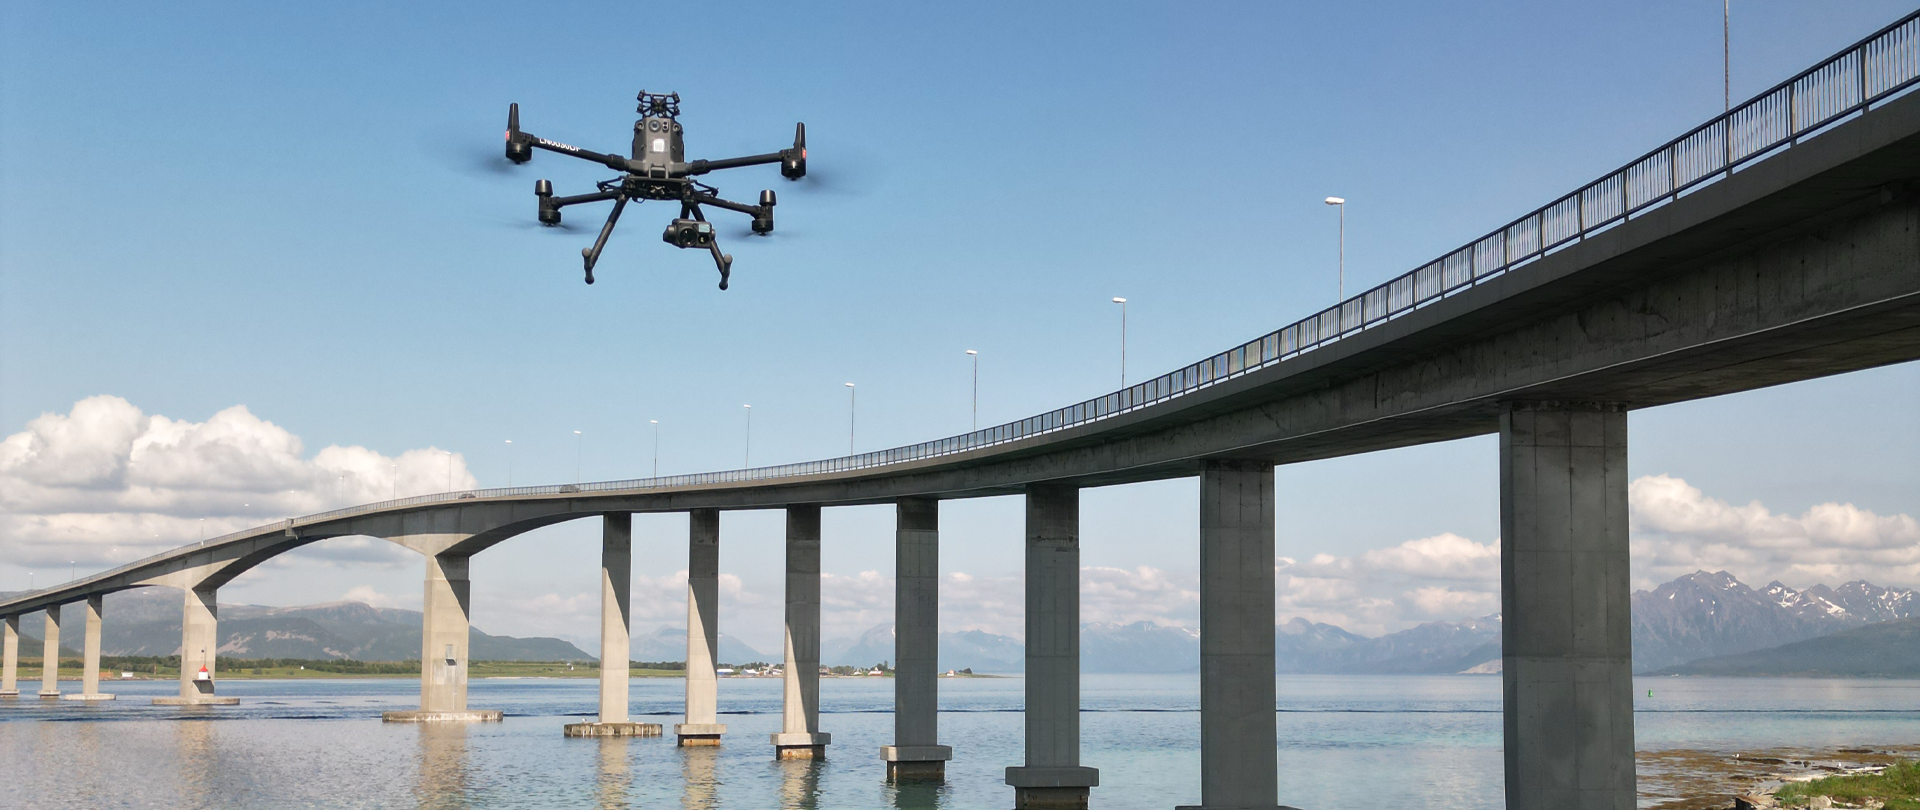 A quadrotor flying alongside a bridge during an inspection.